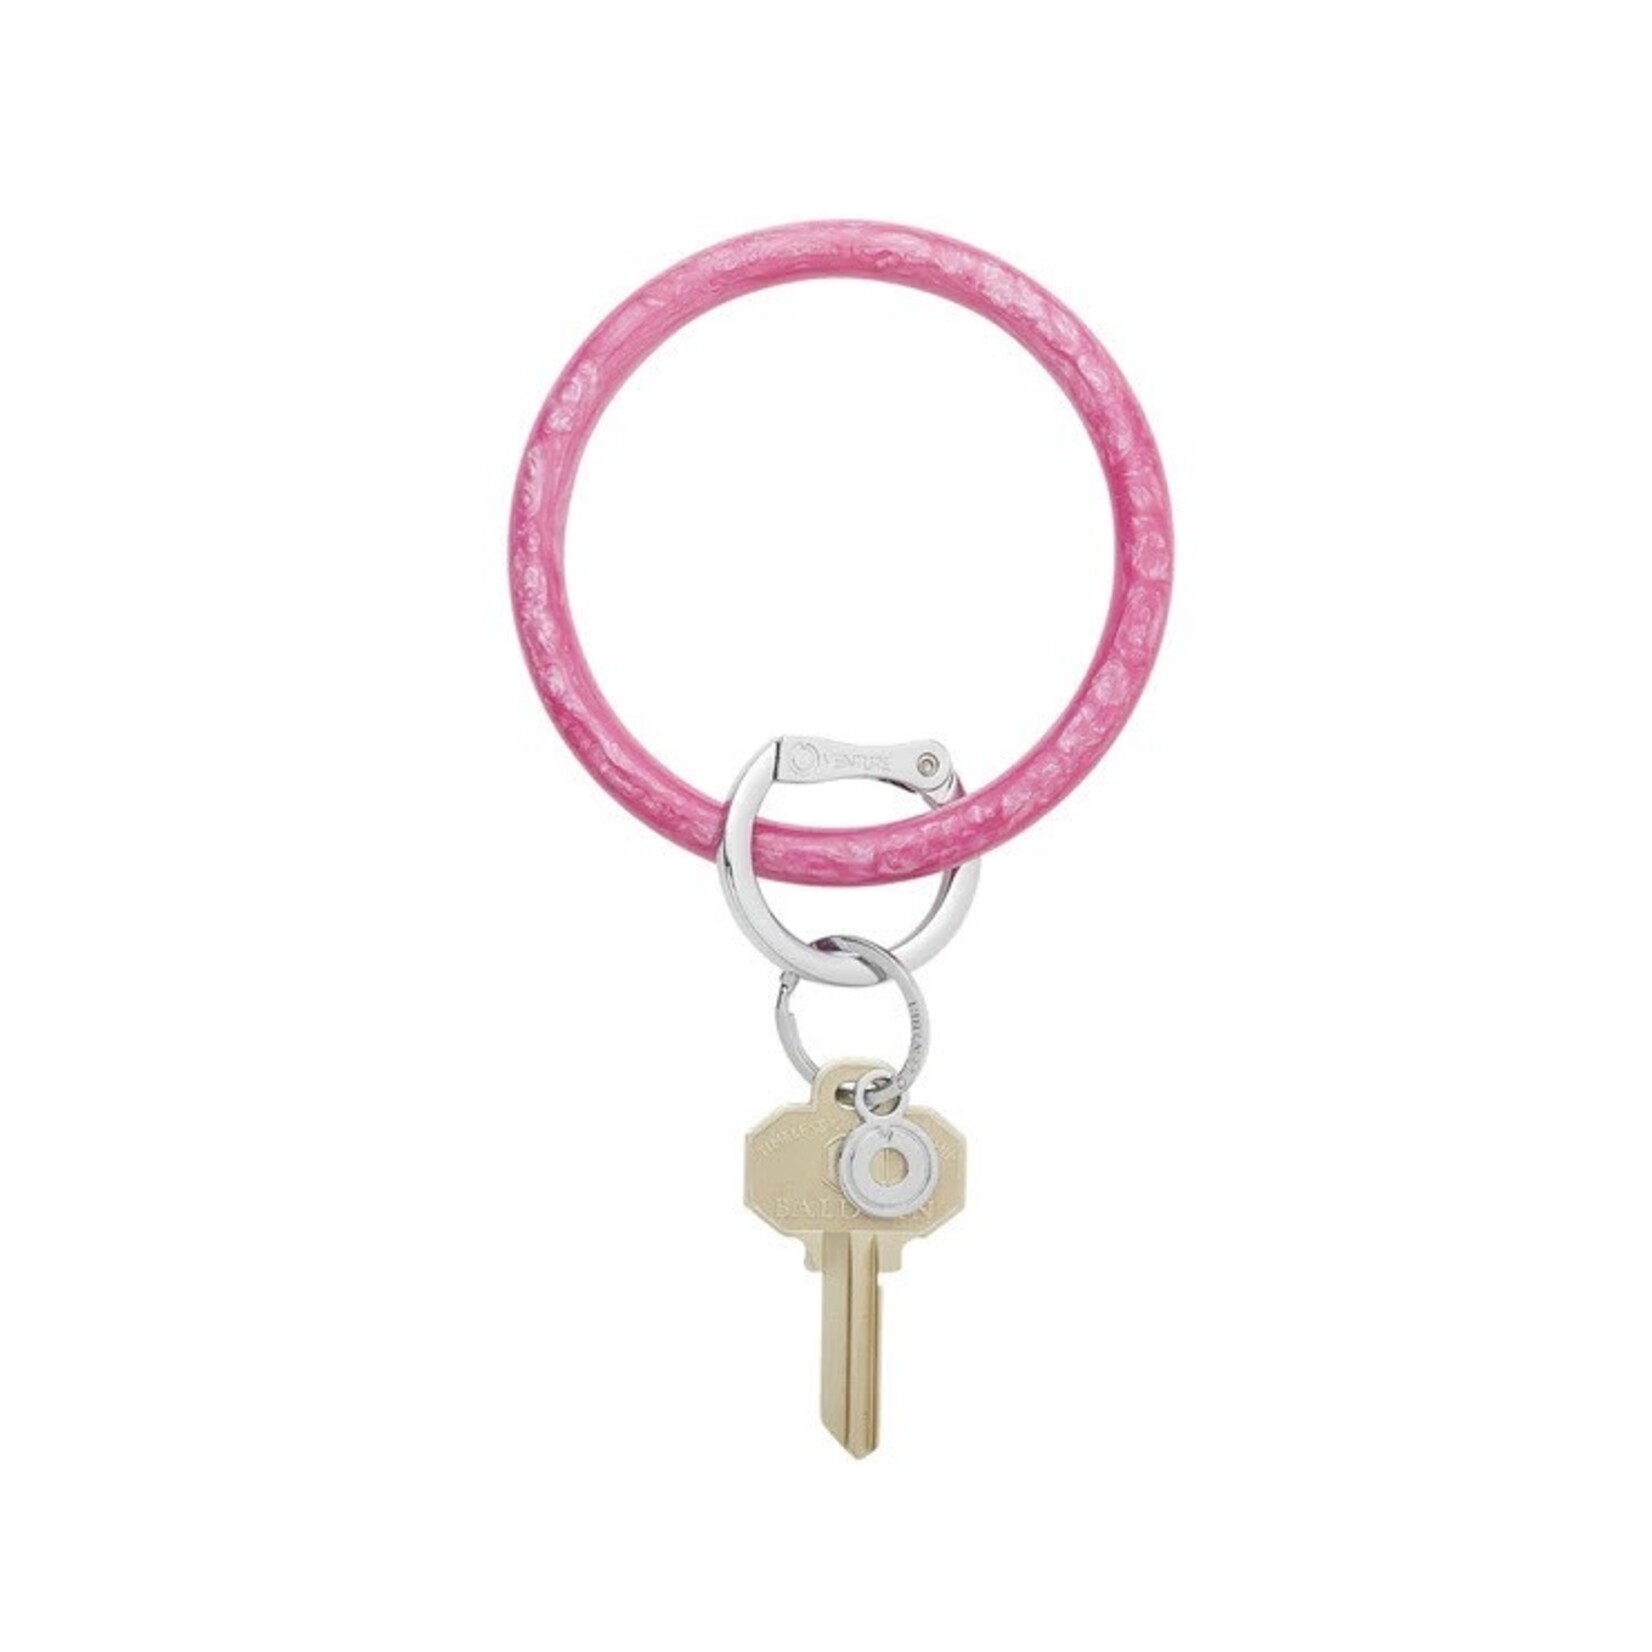 Oventure Big O® Key Ring in Pink Topaz Resin Collection